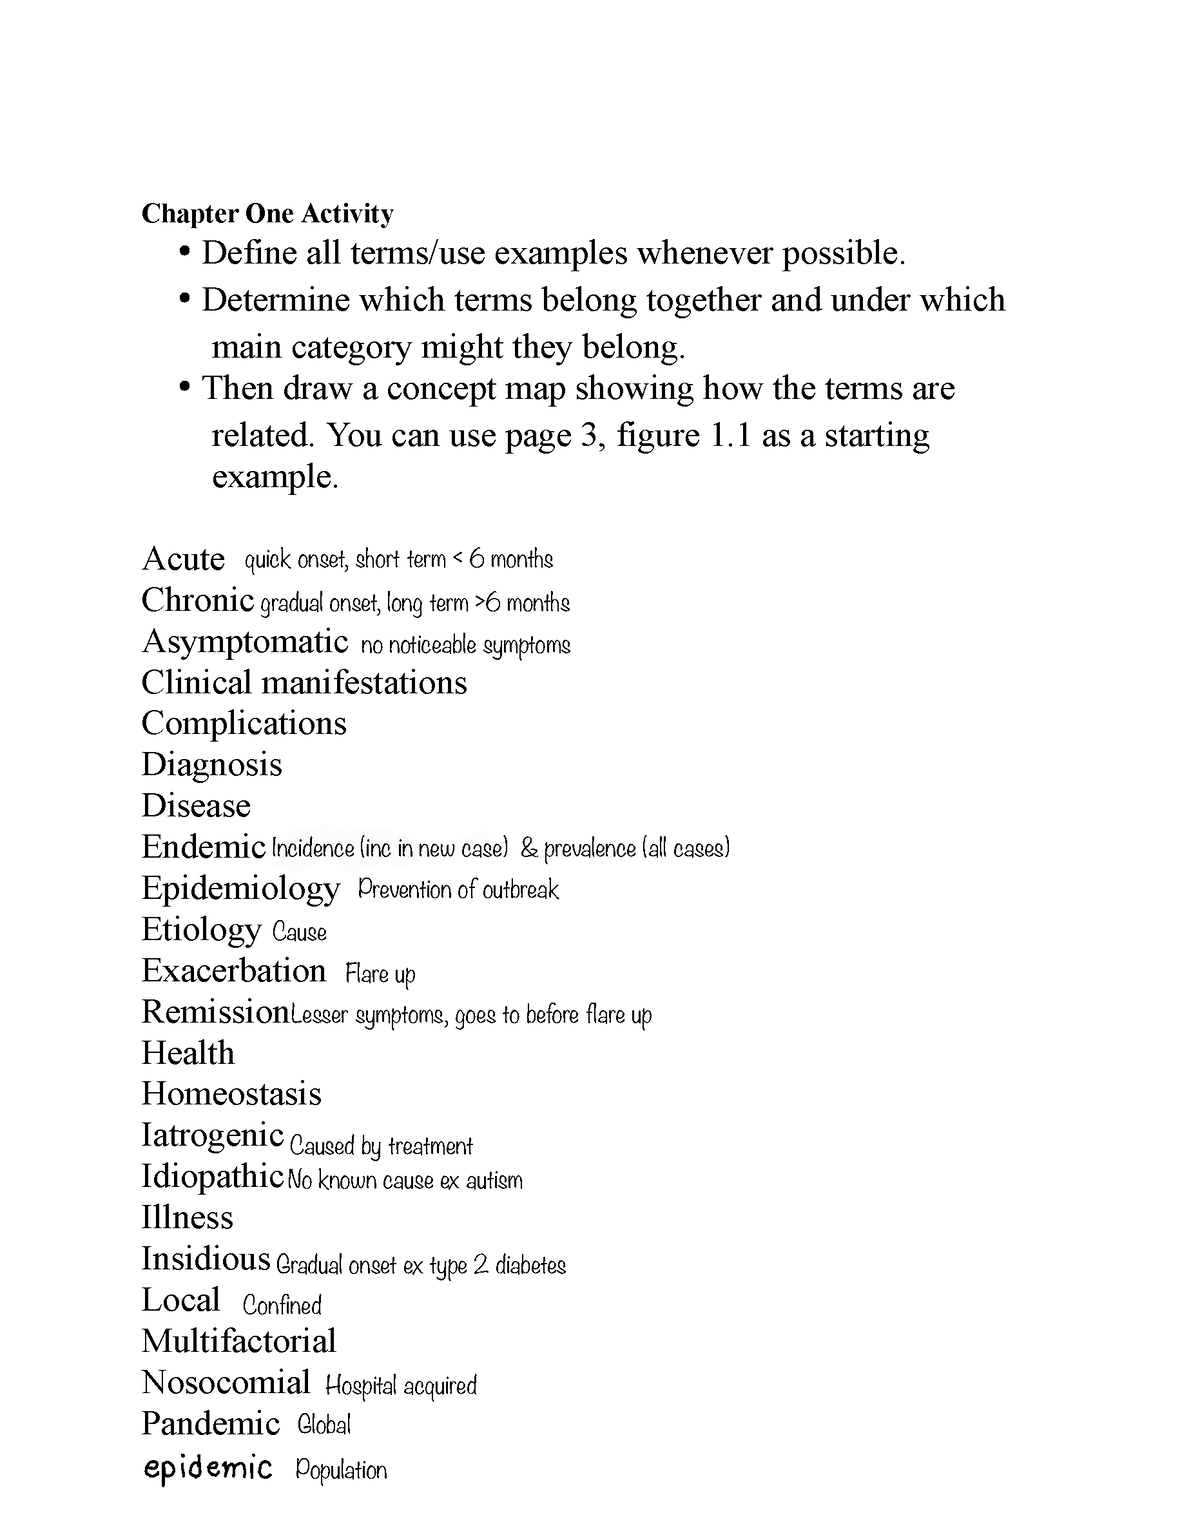 CH. 1 Terms & Concept Map - Chapter One Activity - Define all terms/use ...